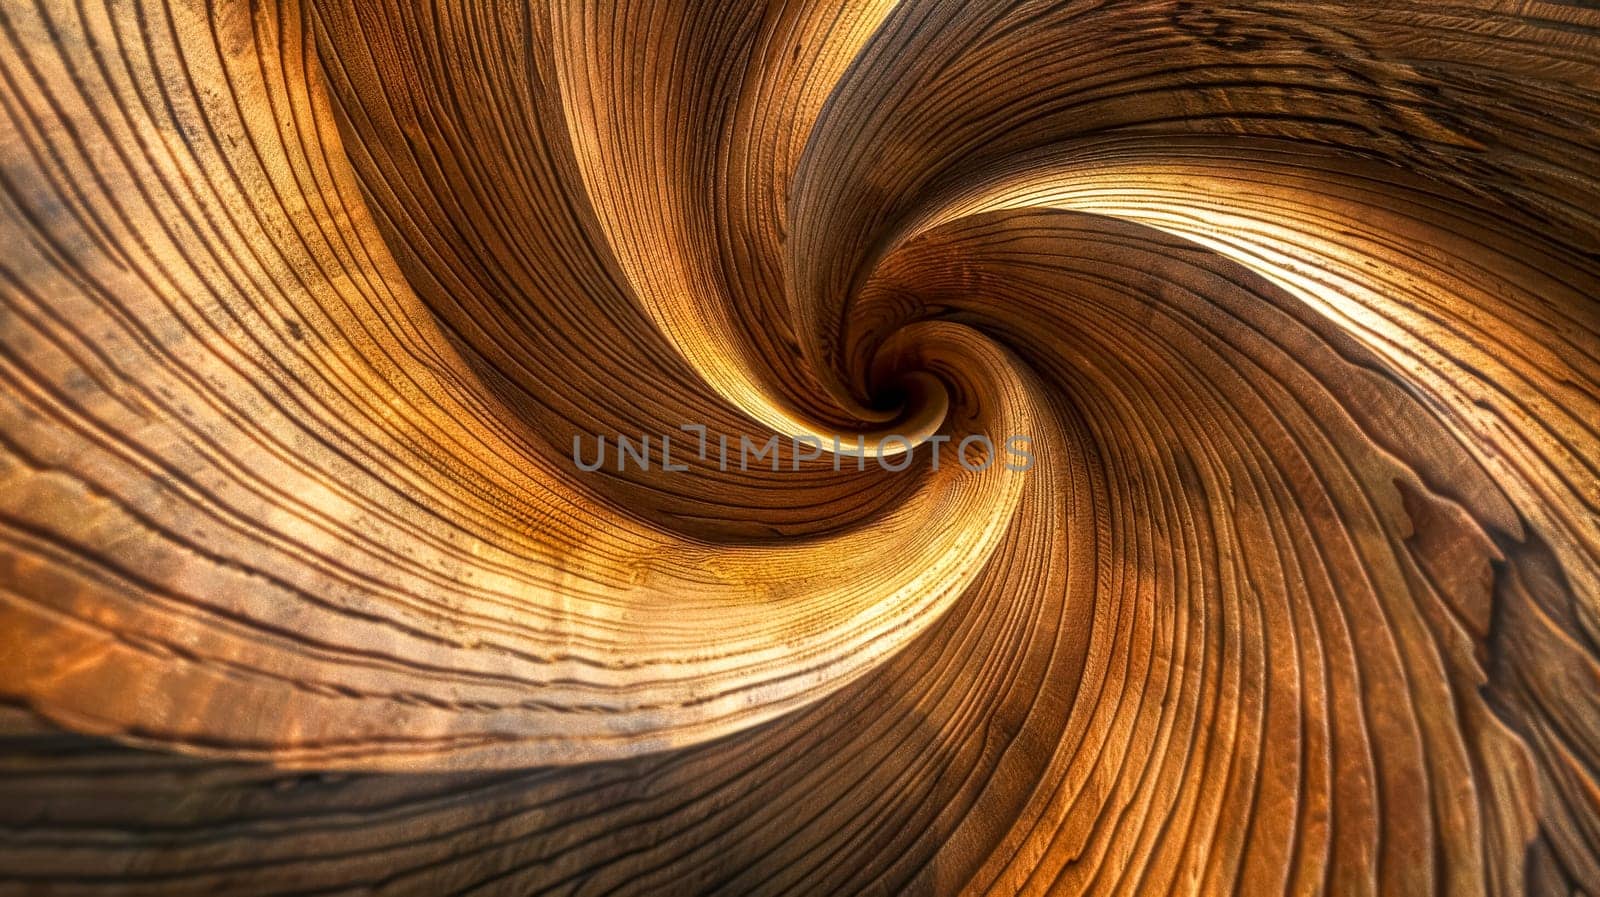 Majestic close-up of a swirling sandstone pattern with intricate natural layers by Edophoto